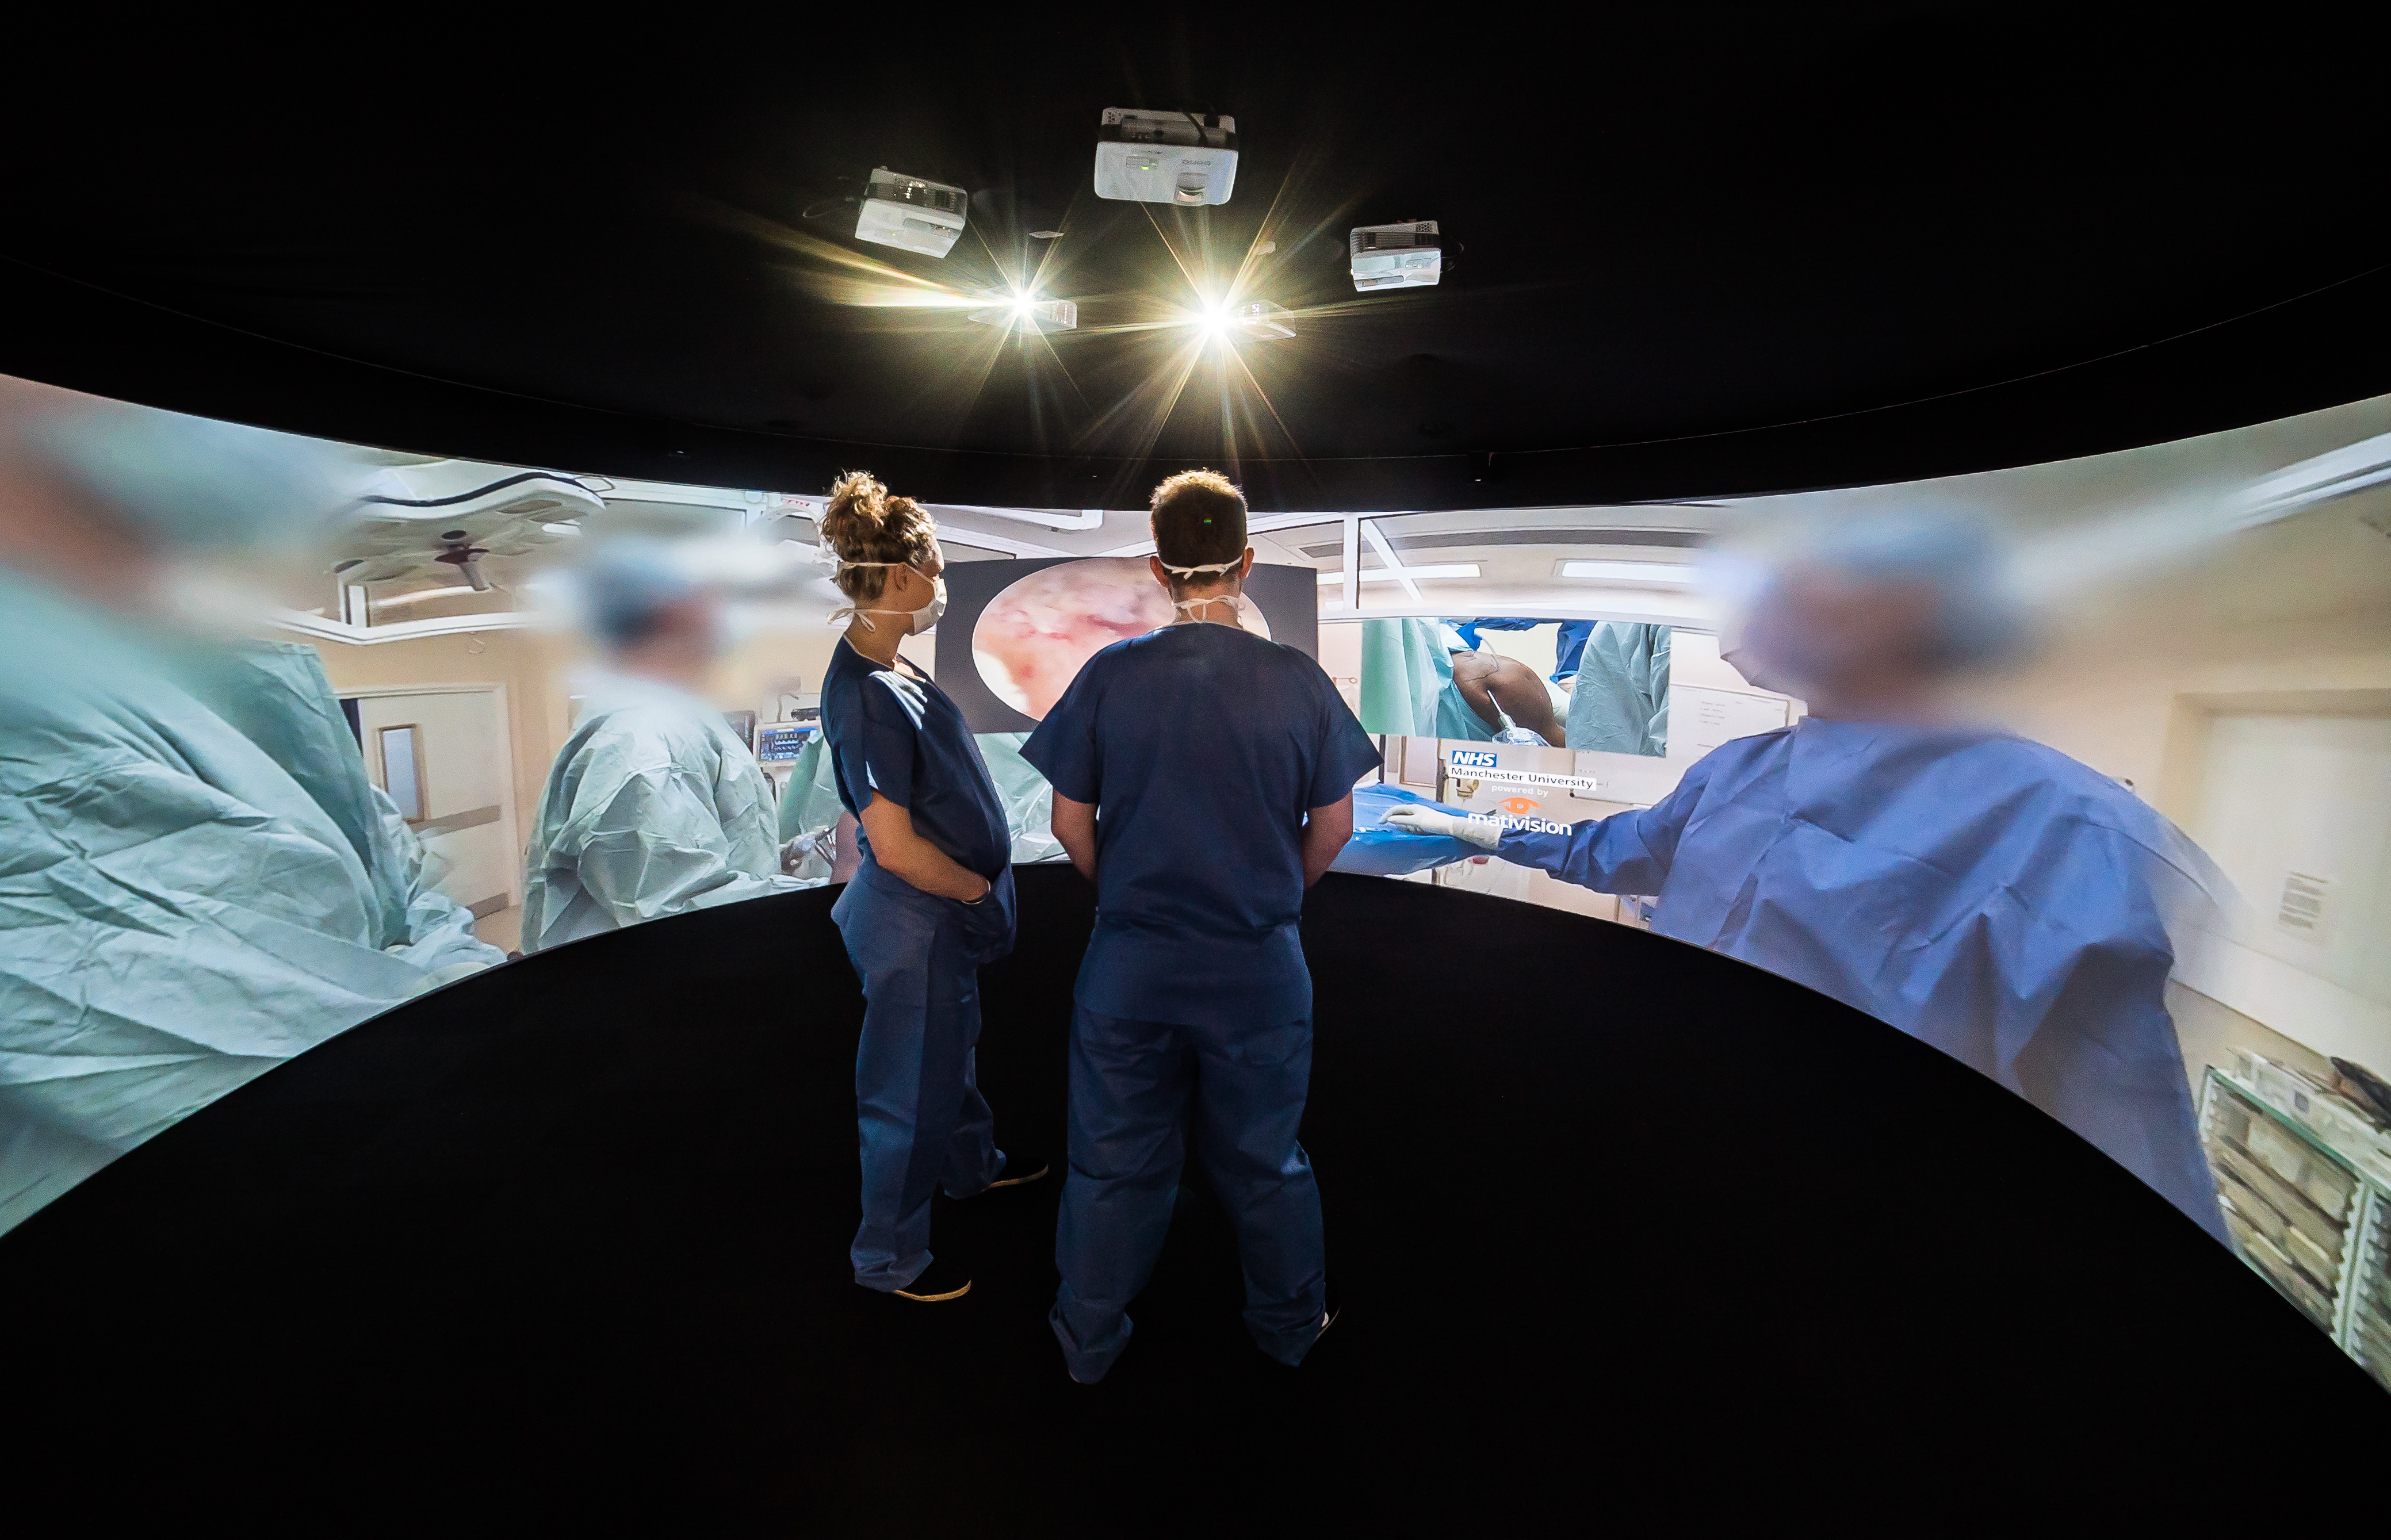 Medical students in scrubs learning with Igloo immersive technology